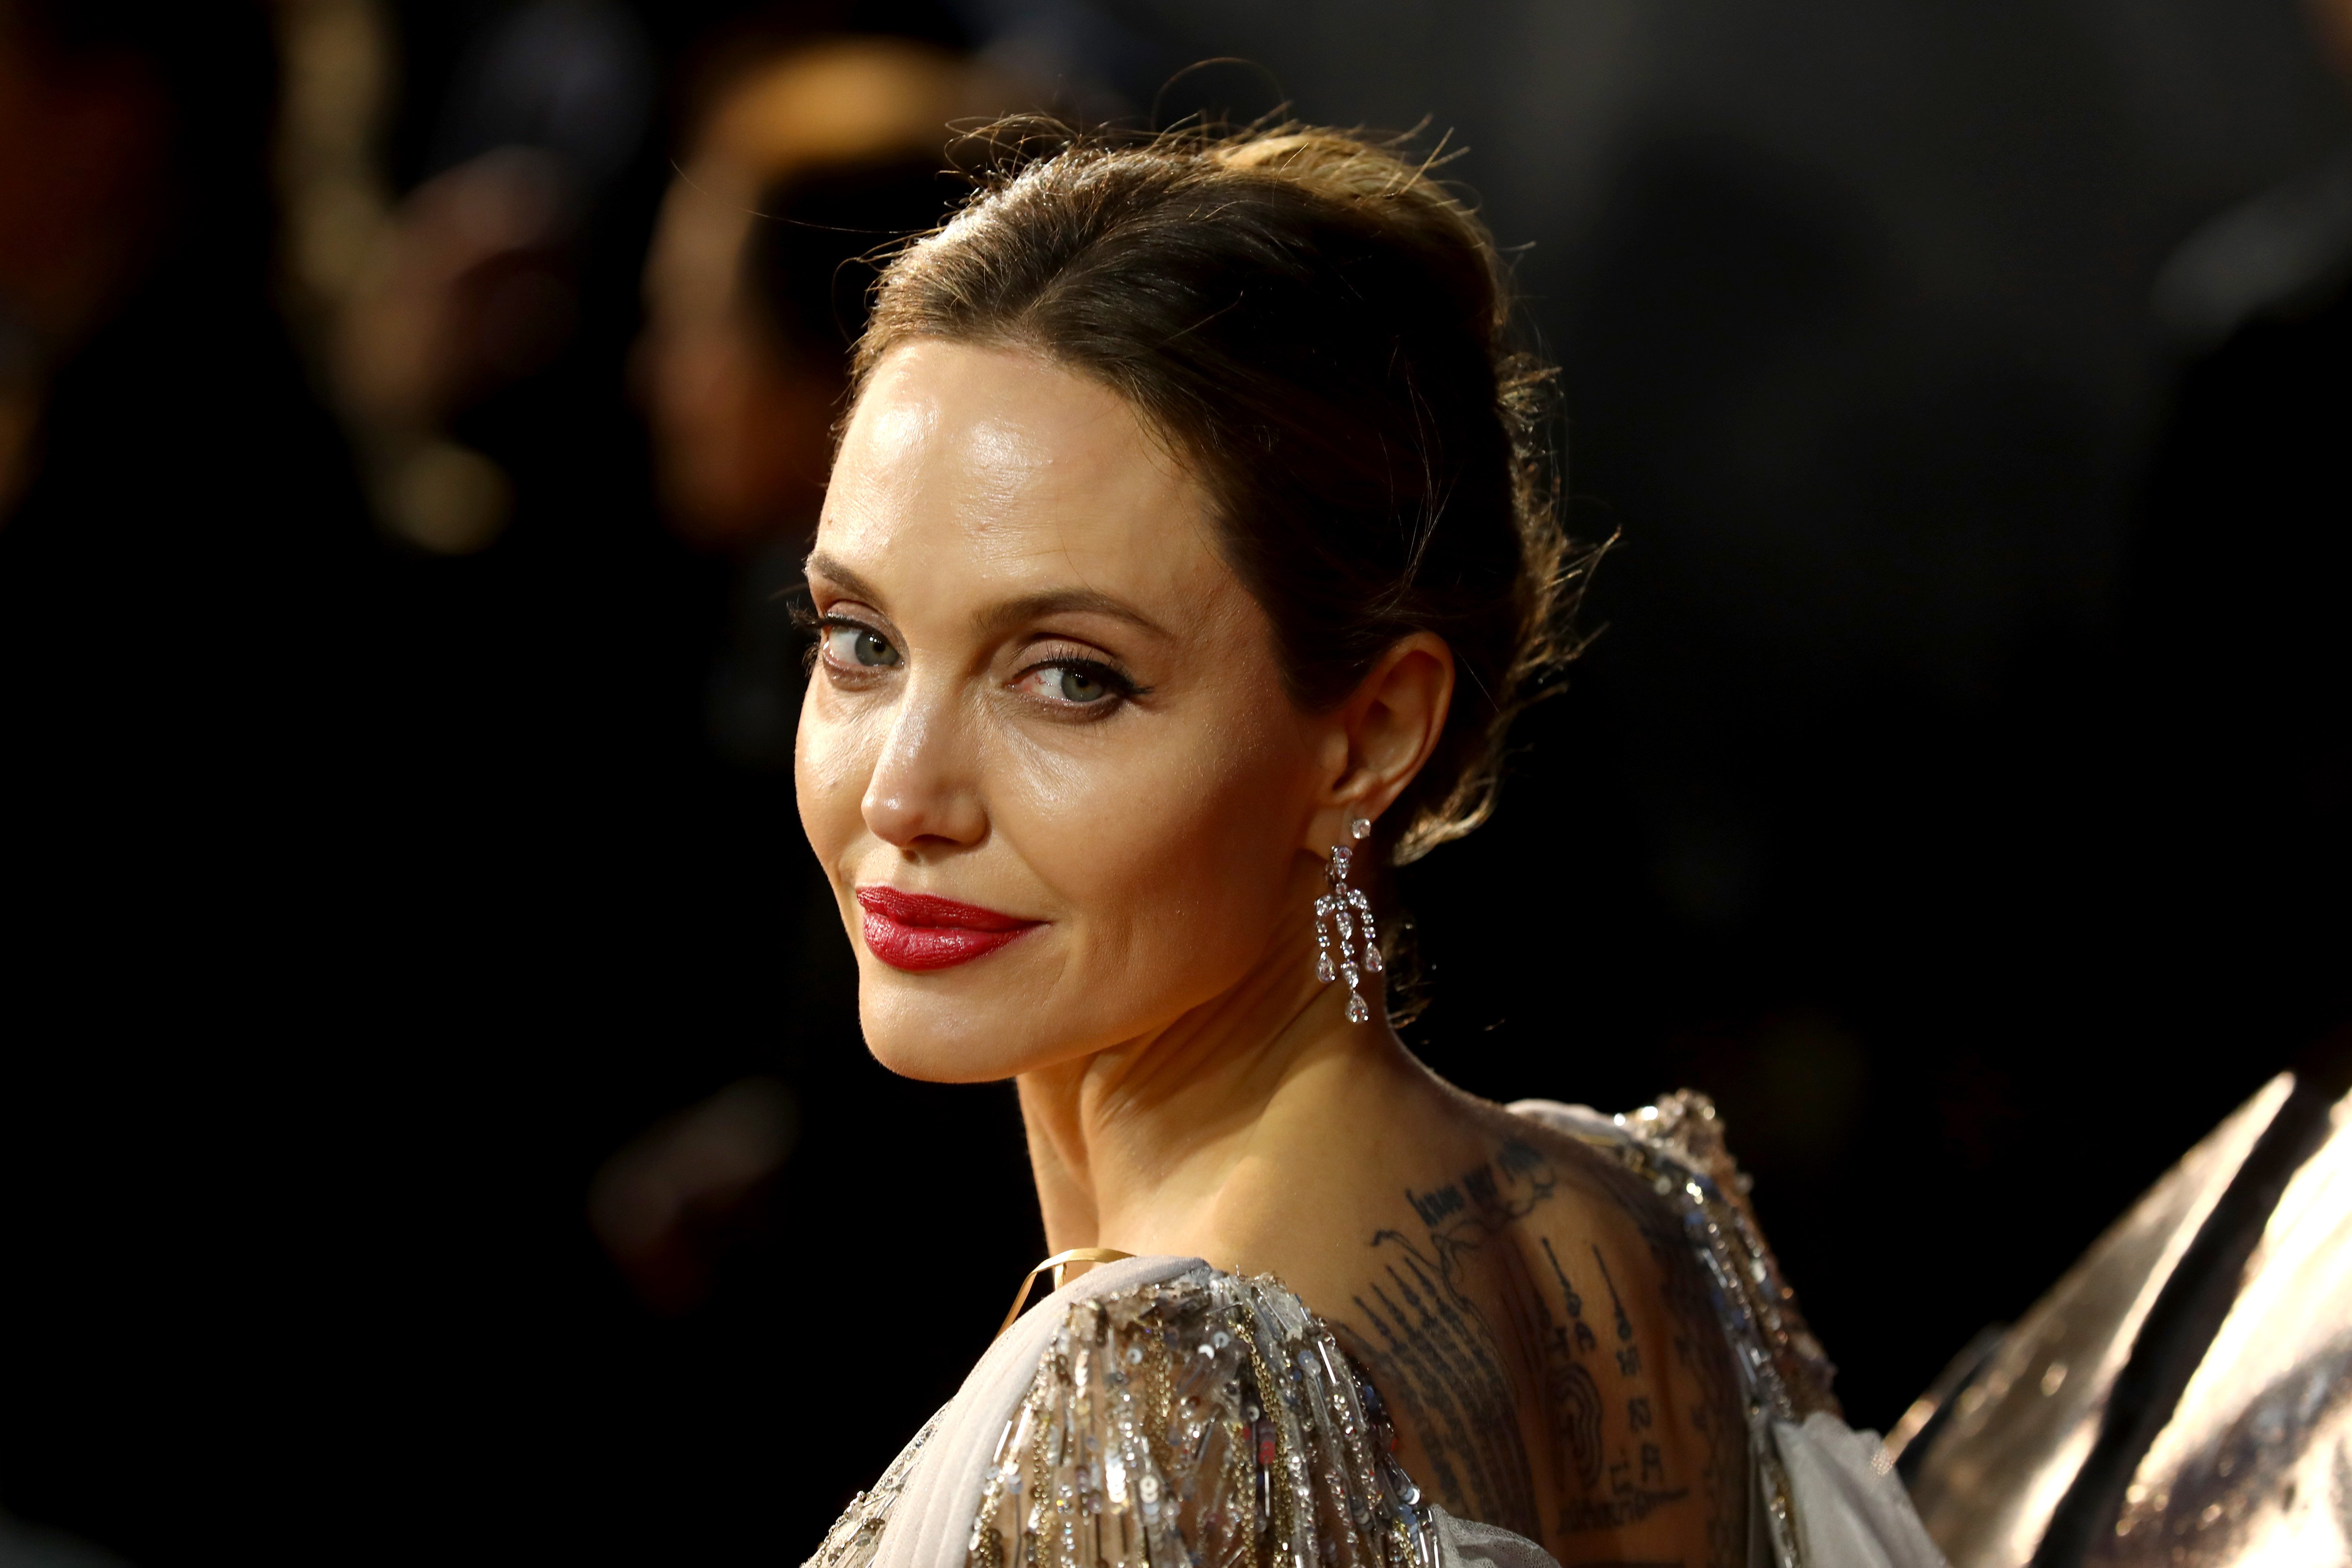 Angelina Jolie at the European premiere of "Maleficent: Mistress of Evil" at Odeon IMAX Waterloo on October 9, 2019. | Photo: Getty Images